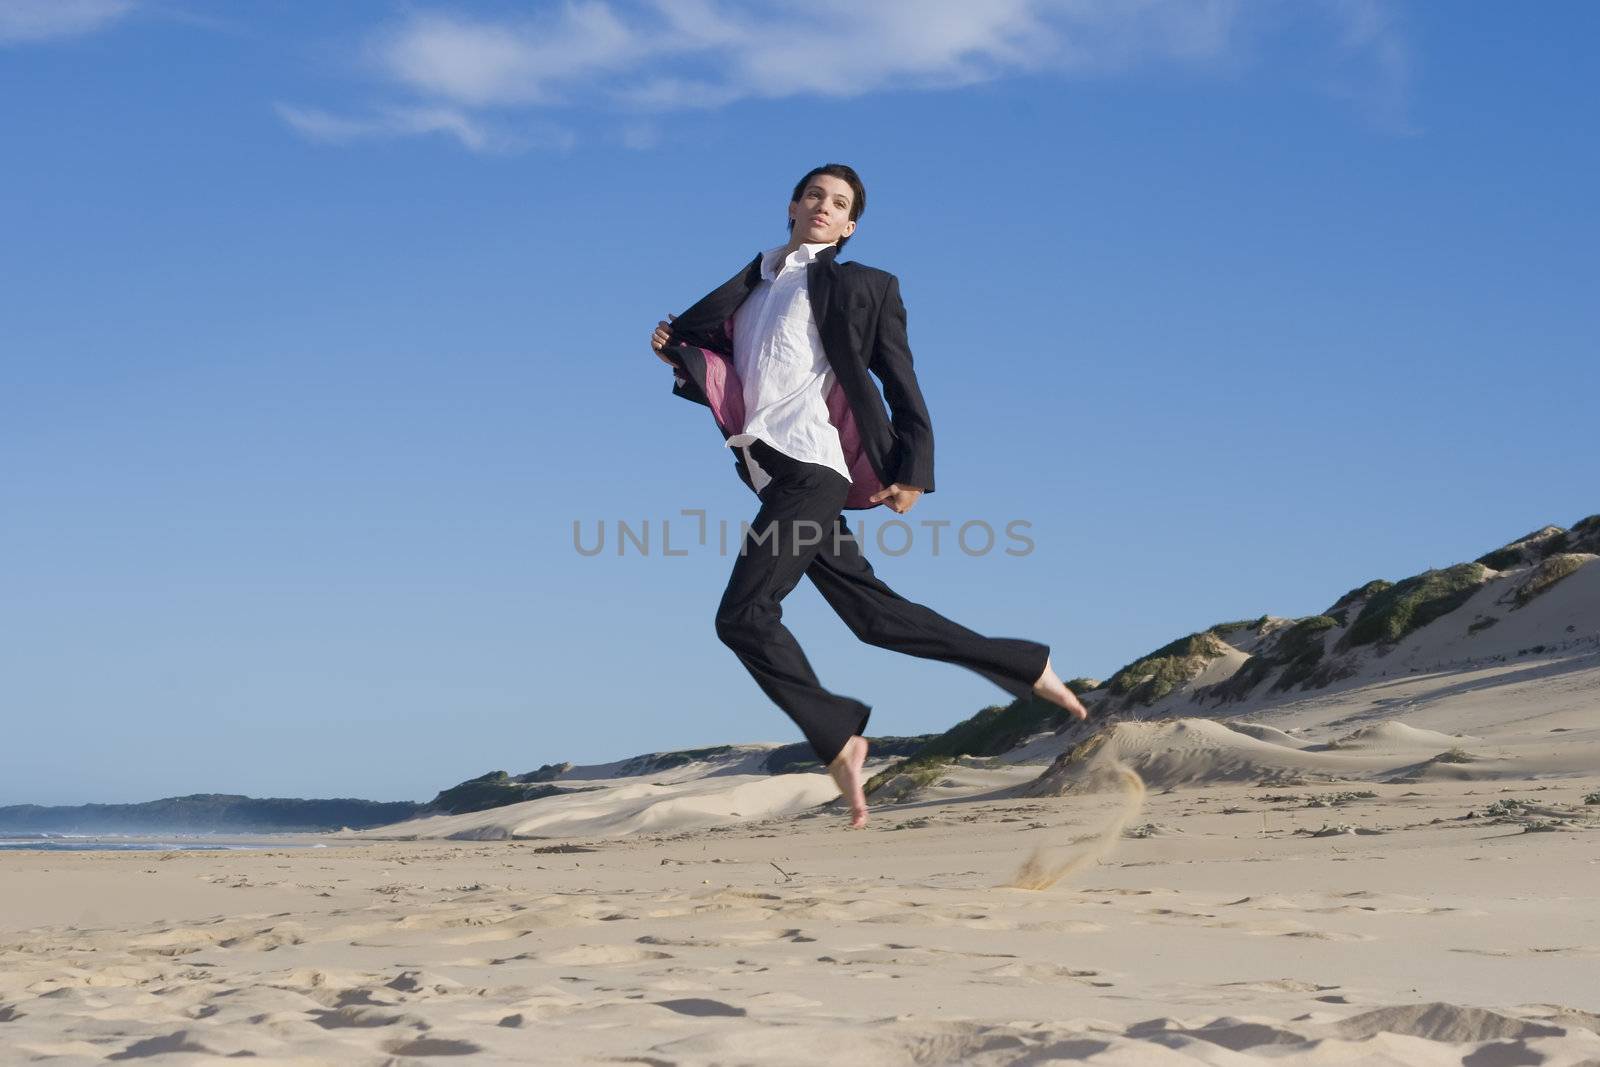 Young professional jumping in the air wearing a business suit